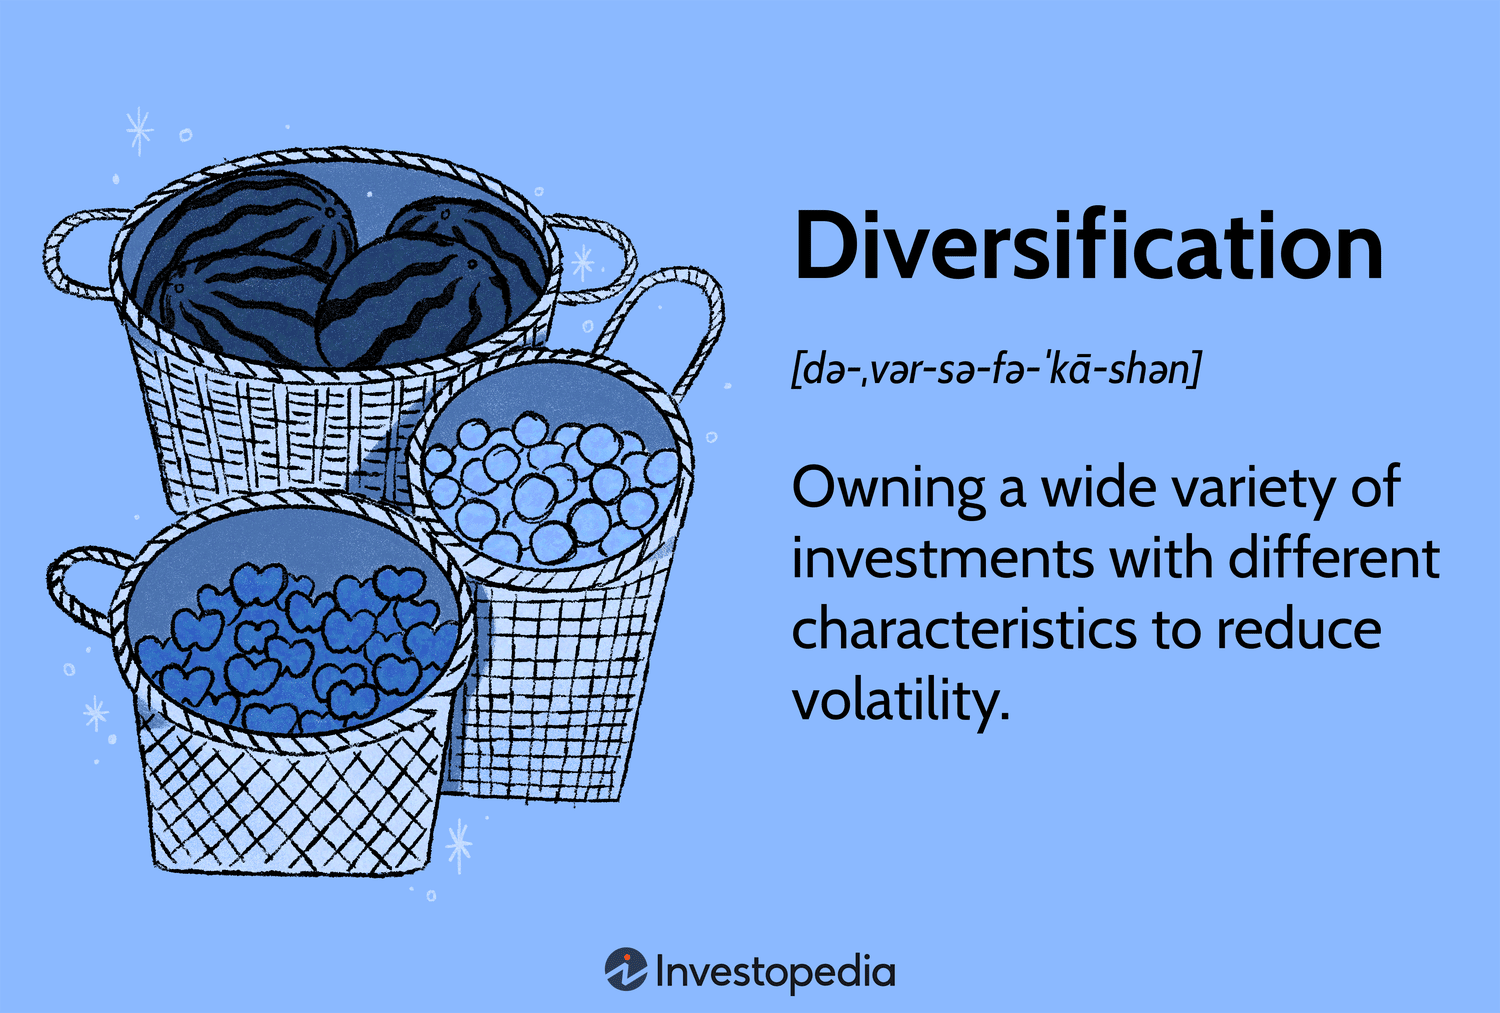 Diversification: Owning a wide variety of investments with different characteristics to reduce volatility